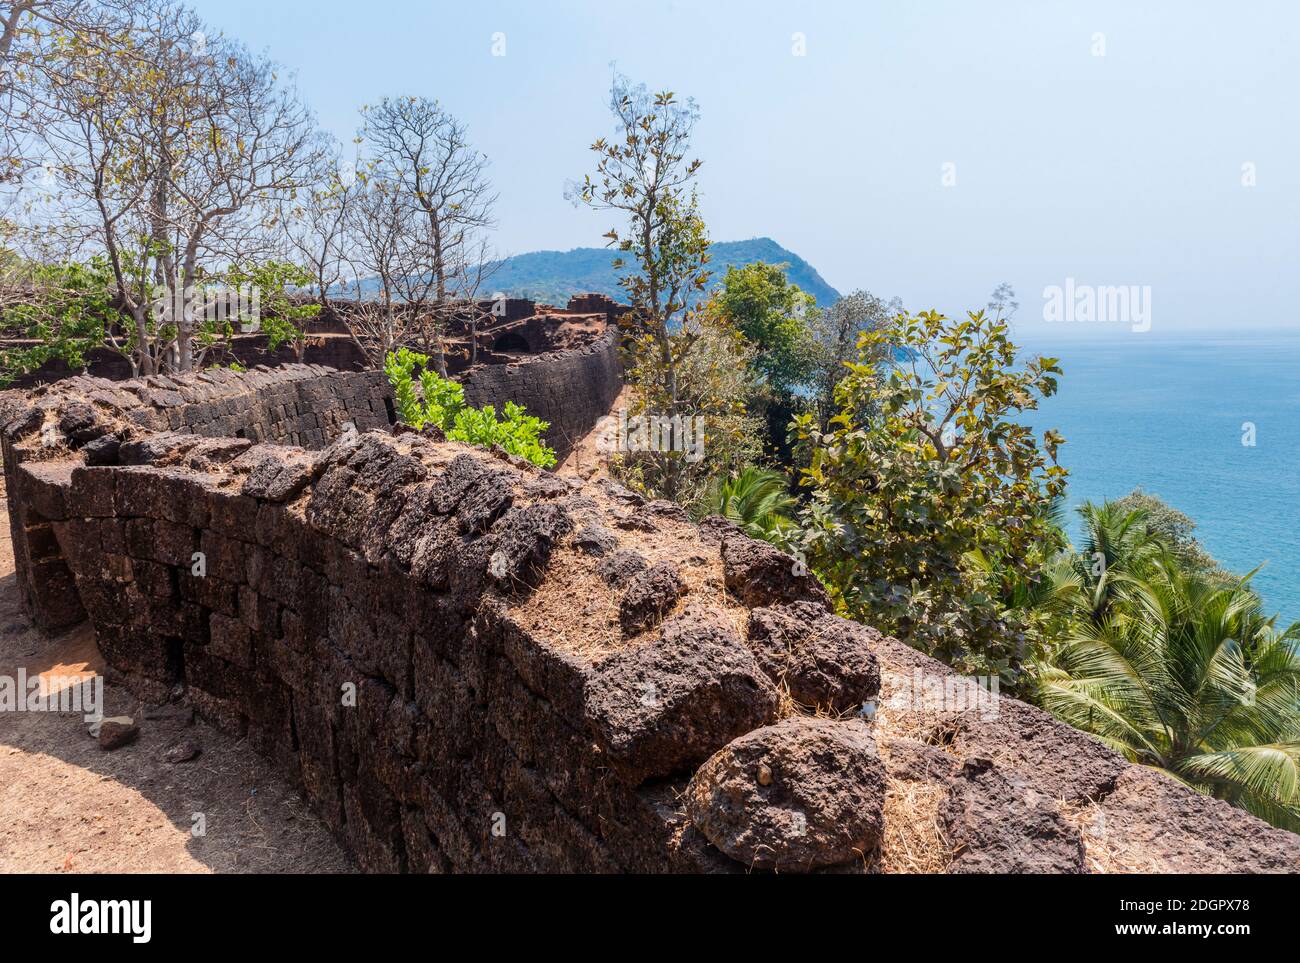 View of the old stone wall of the Portuguese fortress Fort Cabo De Rama, Indian ocean and mountains in Goa, India Stock Photo